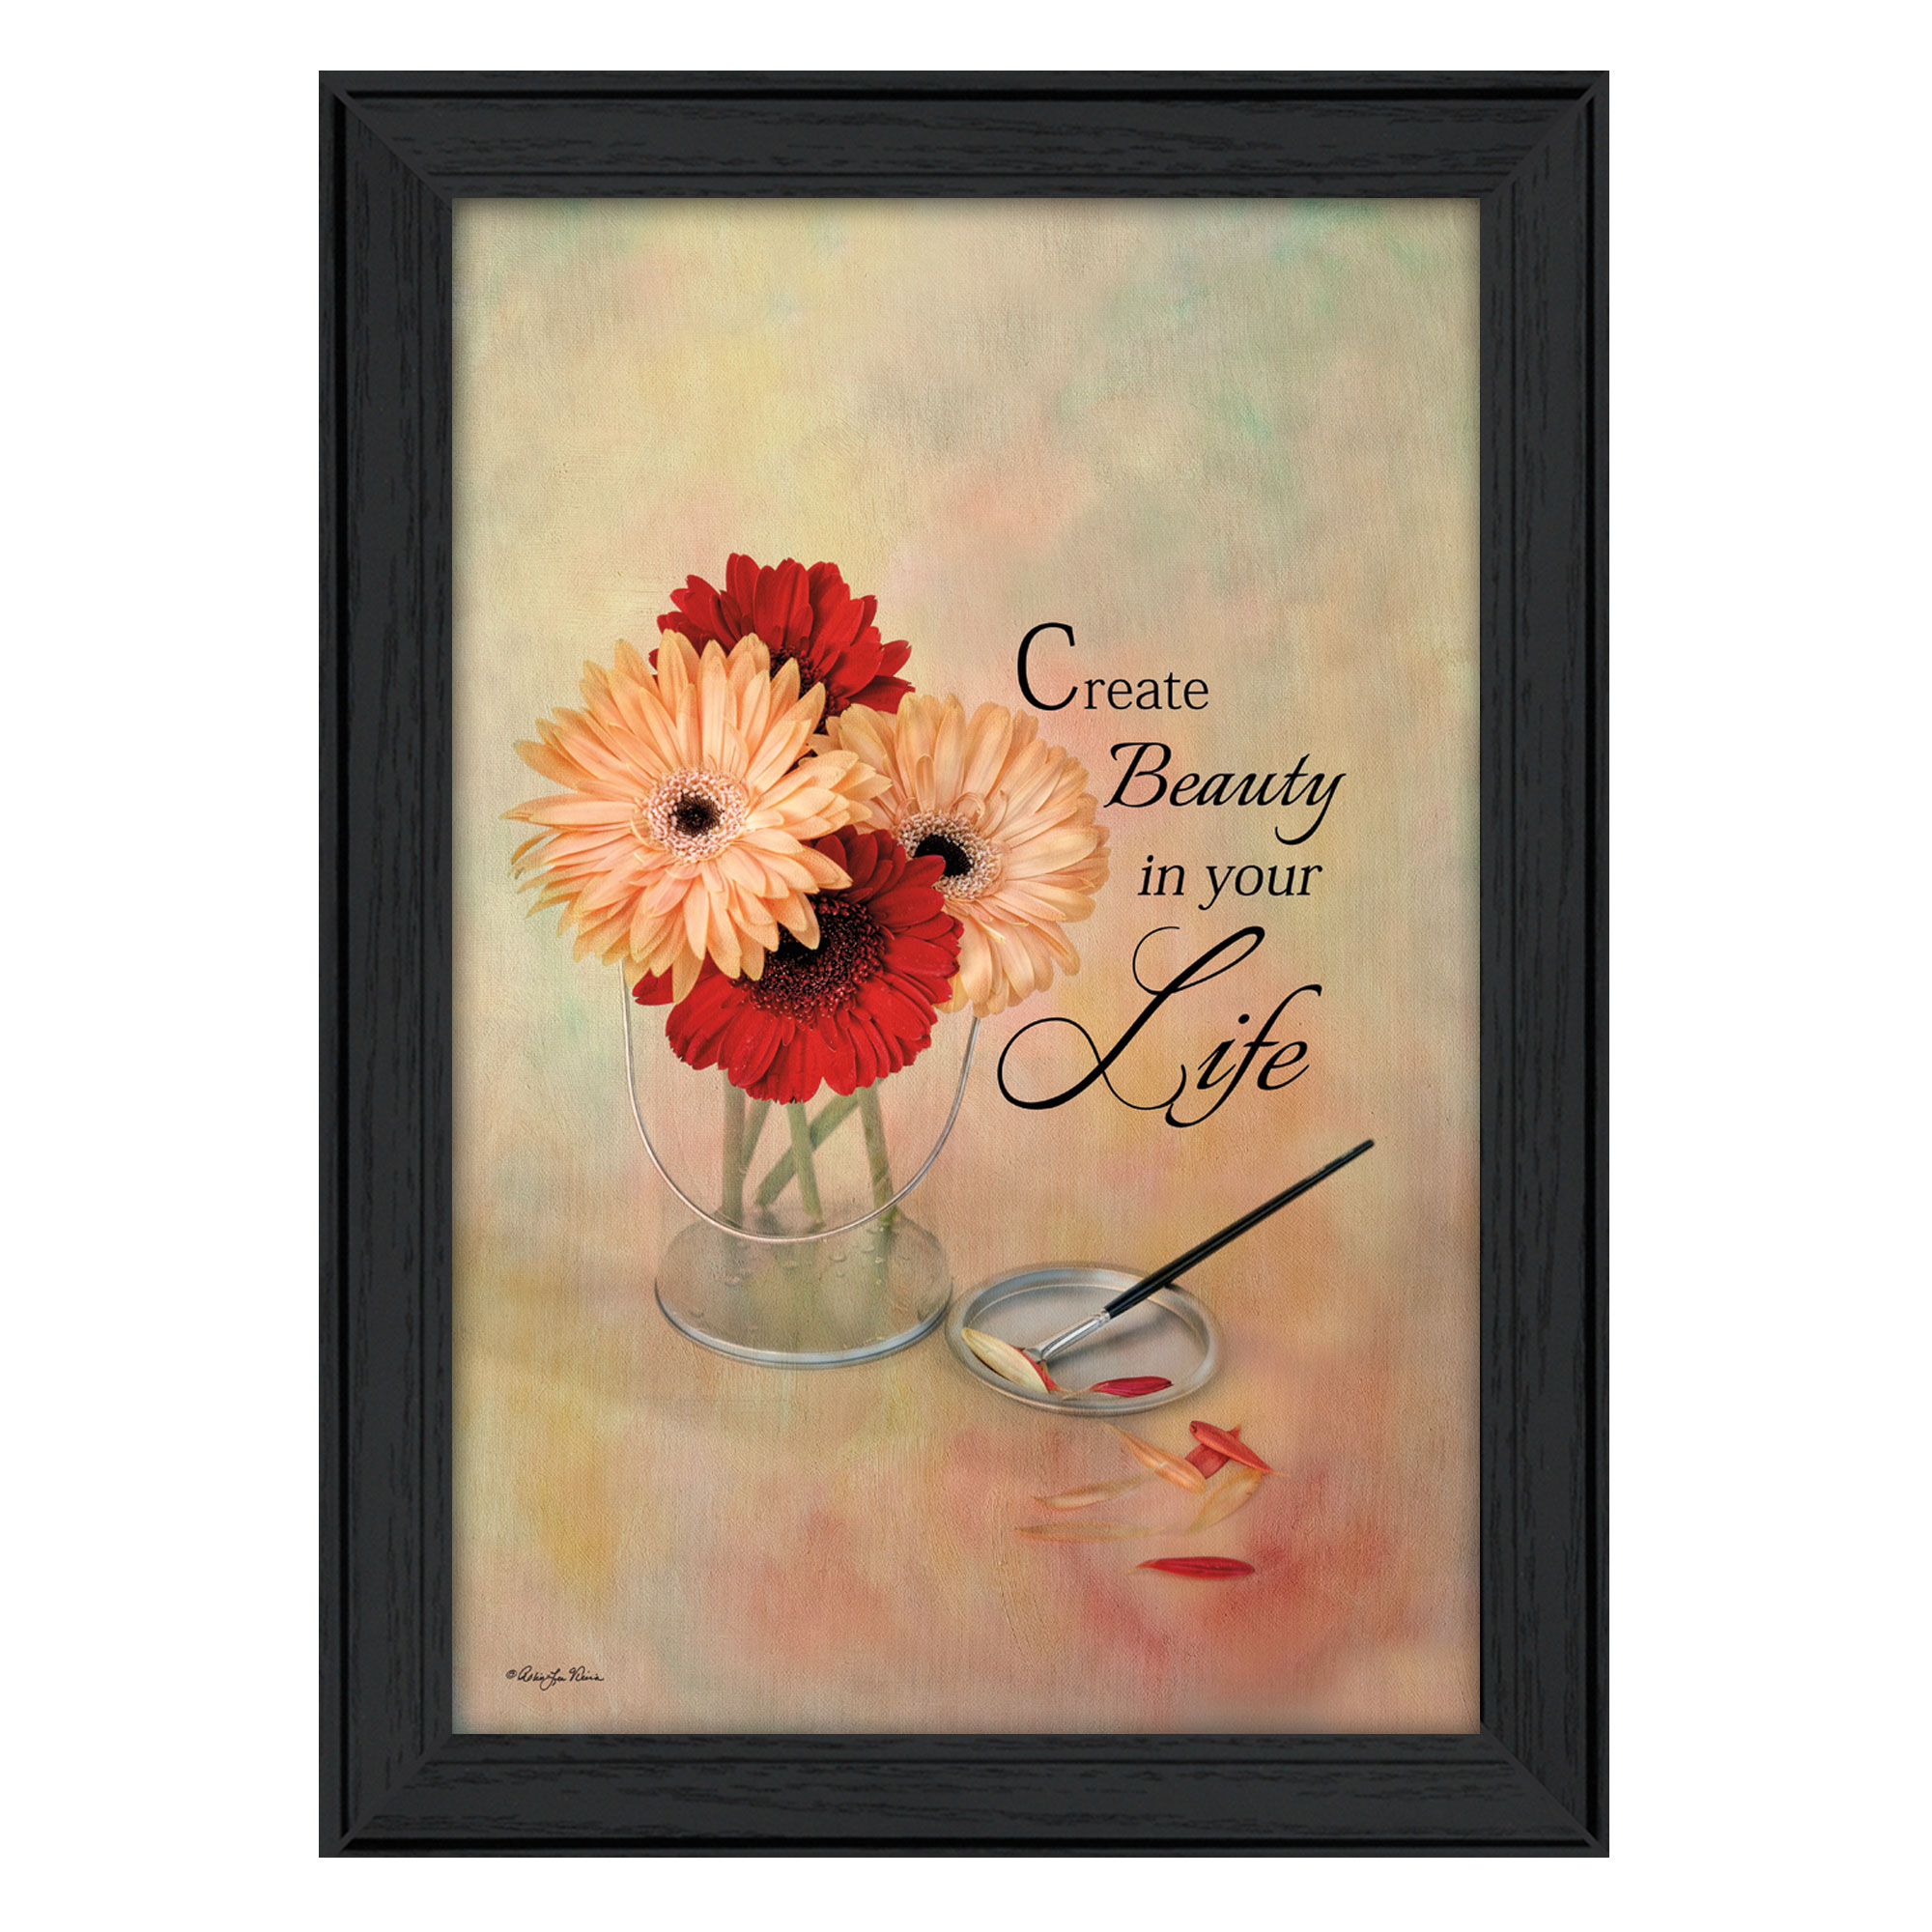 "Create Beauty in Your Life" By Robin-Lee Vieira, Printed Wall Art, Ready To Hang Framed Poster, Black Frame